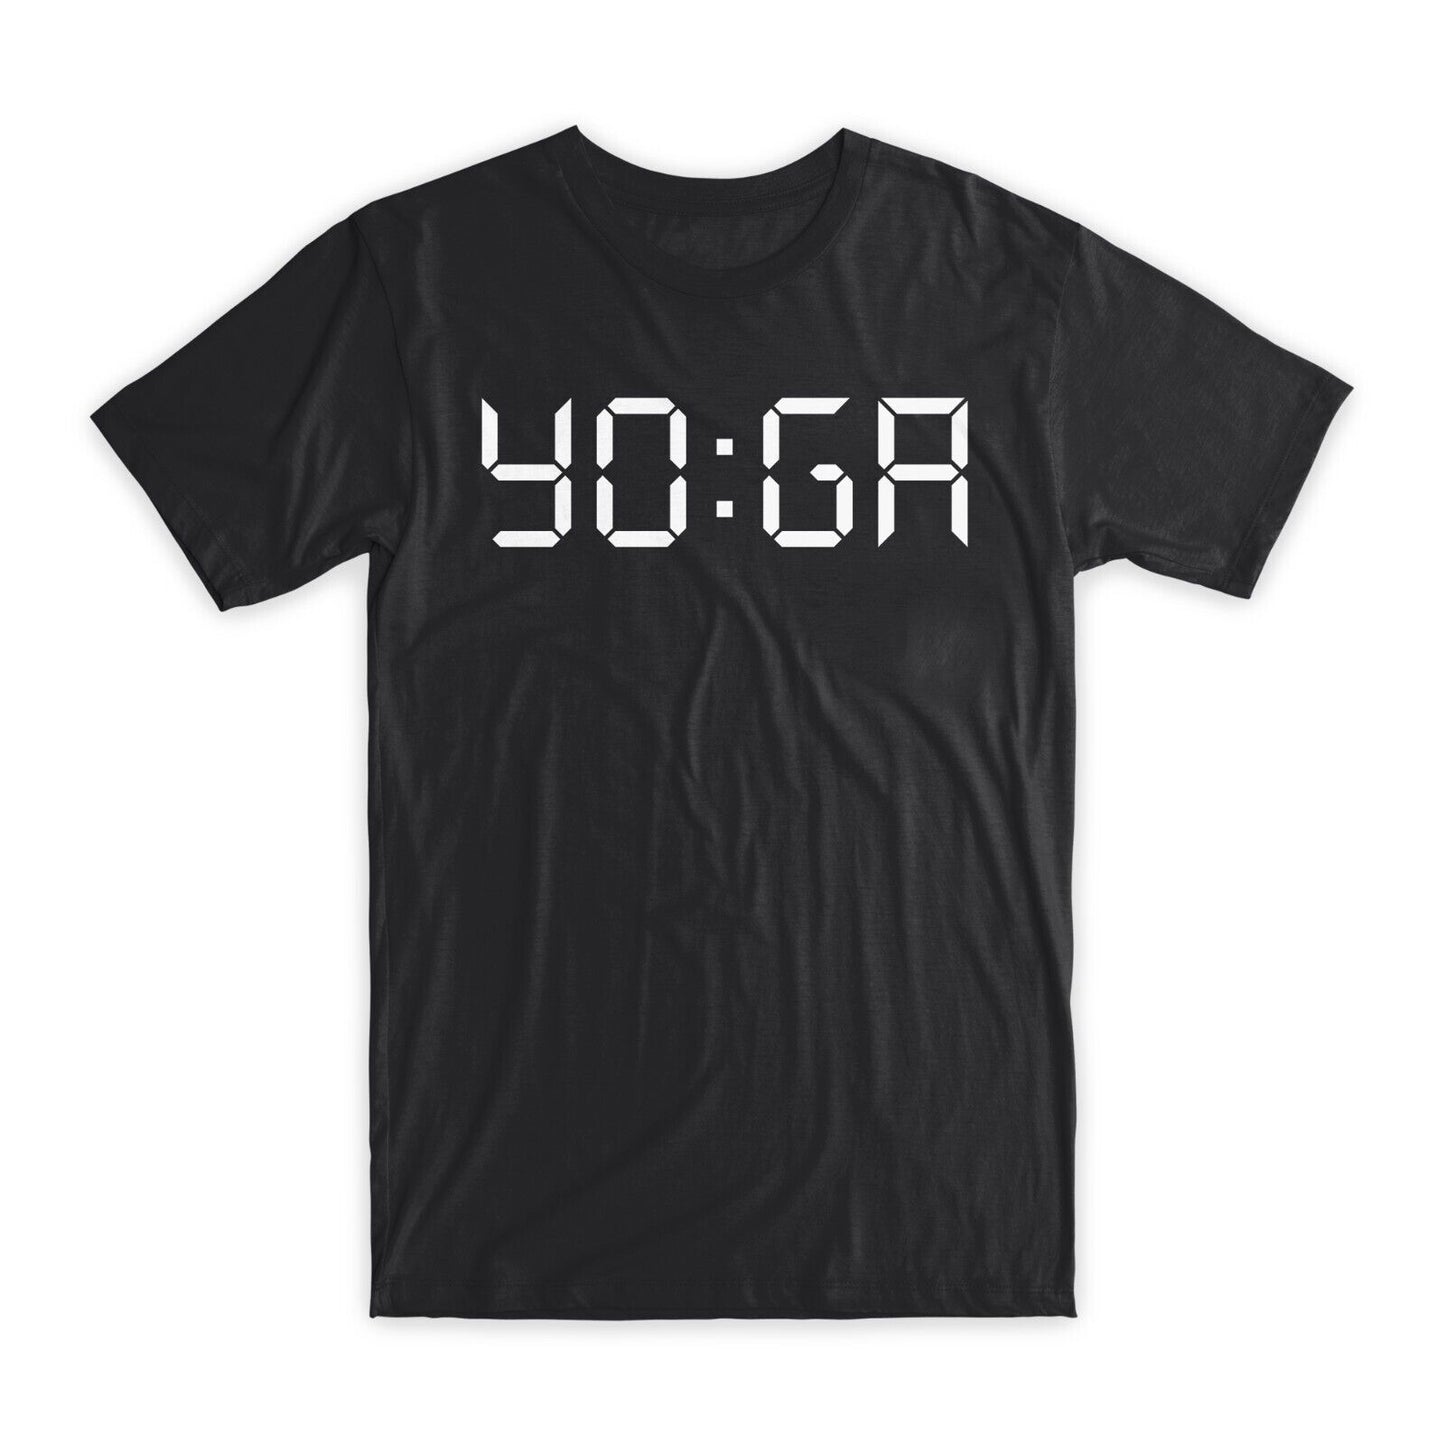 Yoga Printed T-Shirt Premium Soft Cotton Crew Neck Funny Tees Novelty Gifts NEW